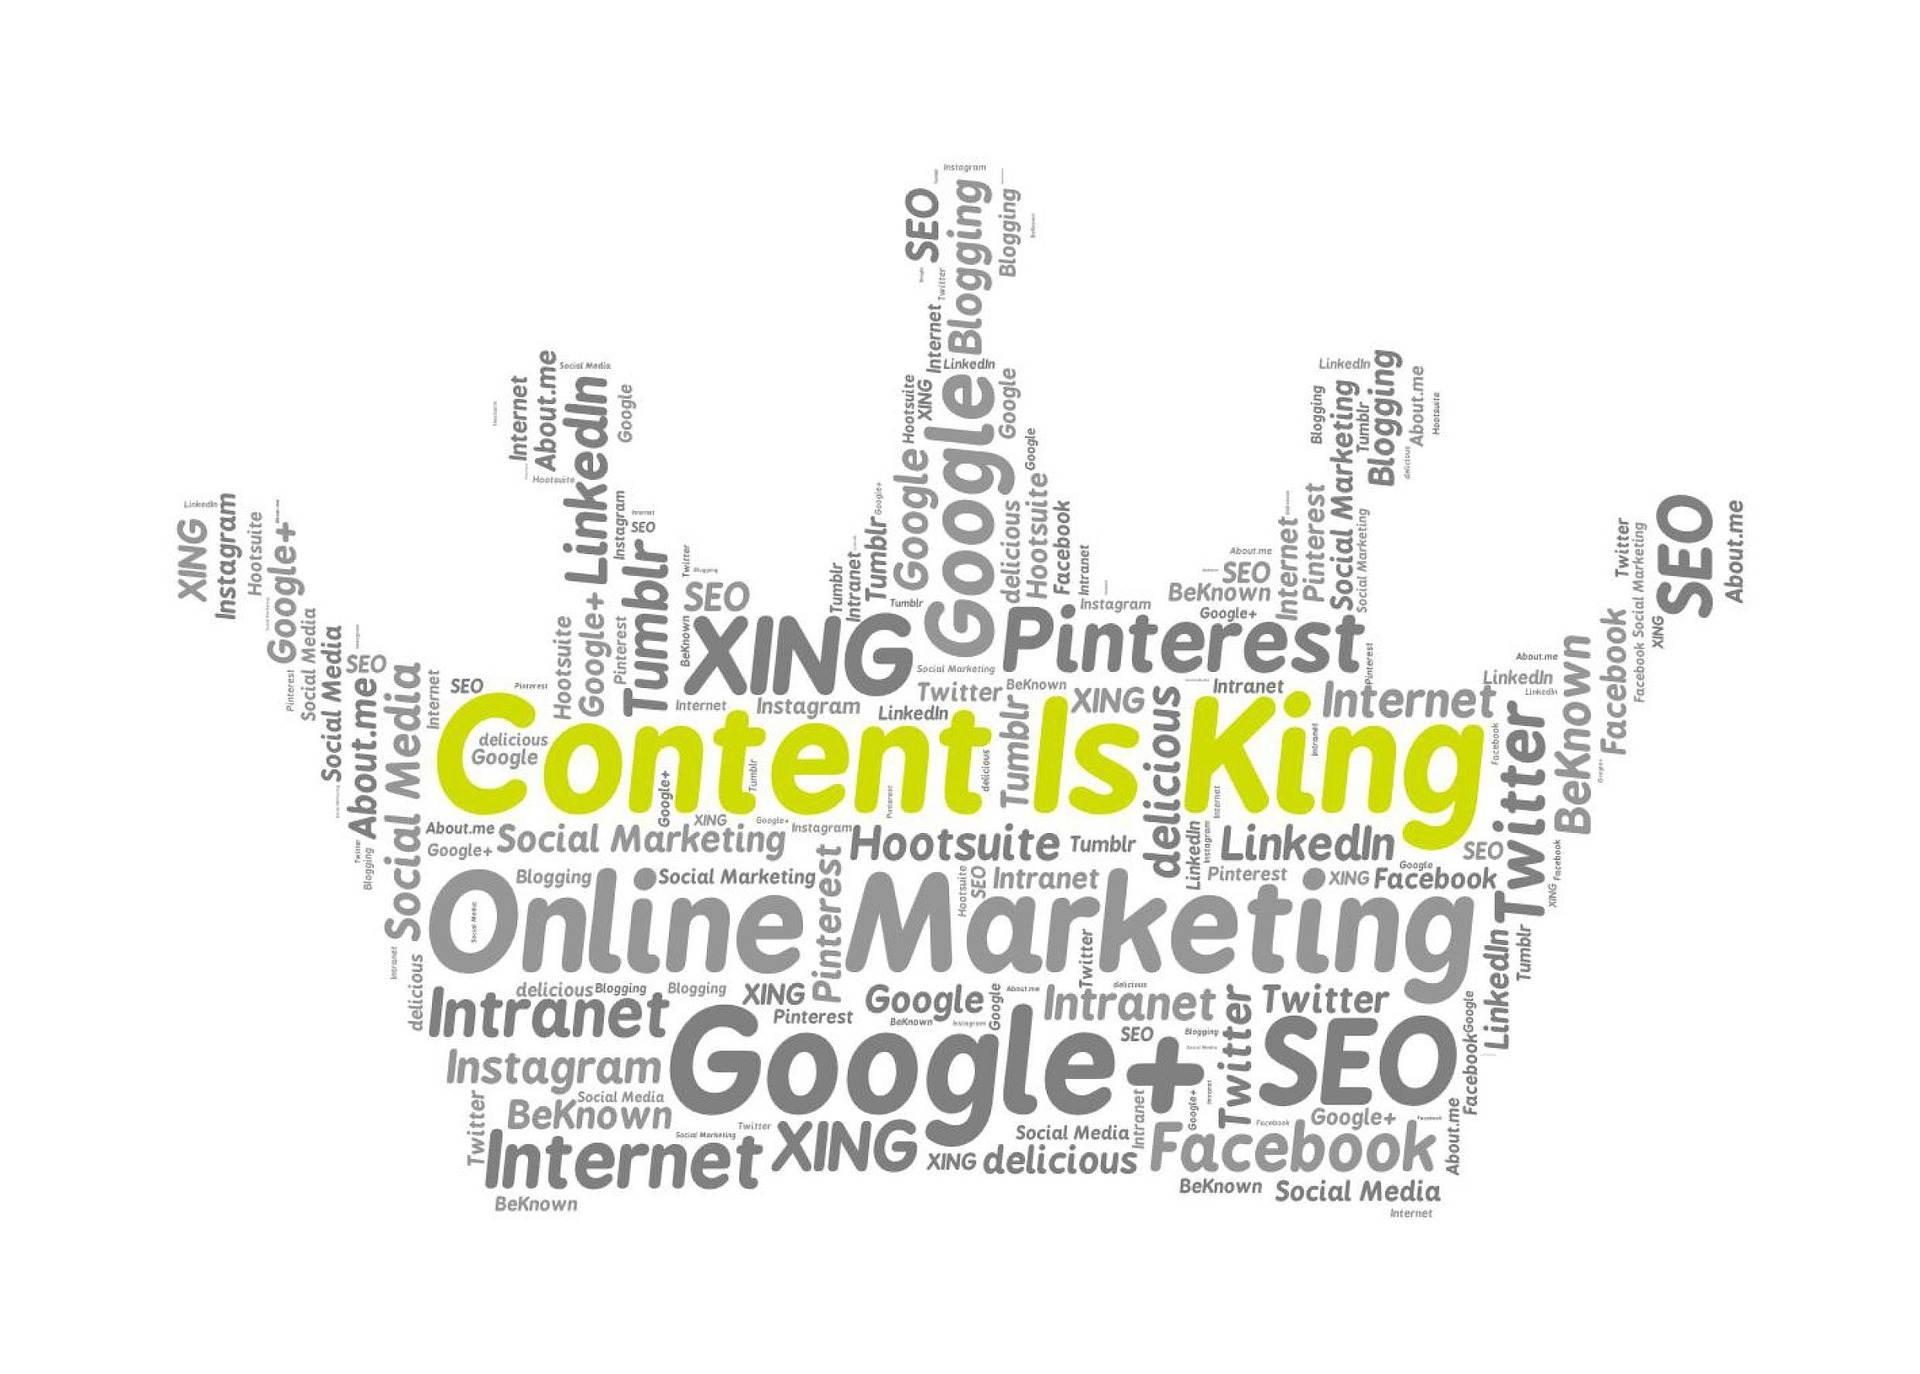 content marketing word cloud